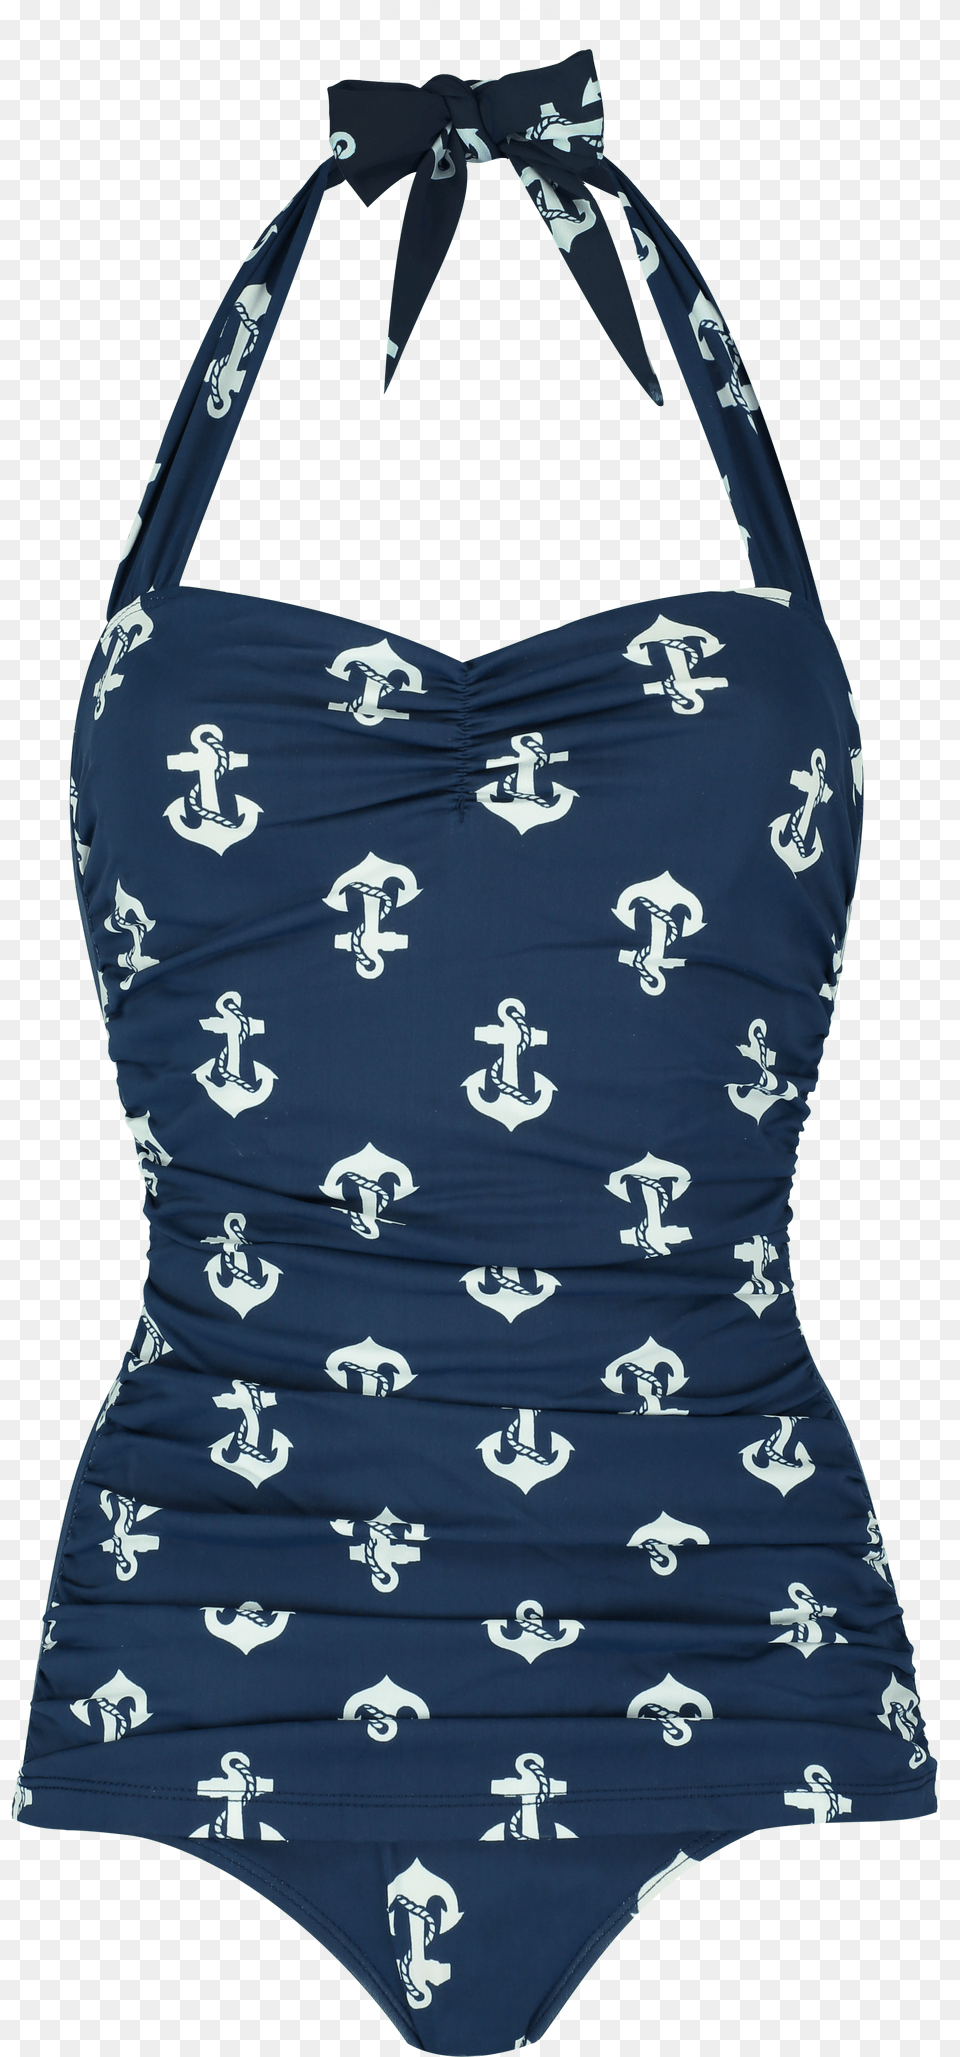 The Sailor Girl Mujer Amazon 2019 Free Transparent Png